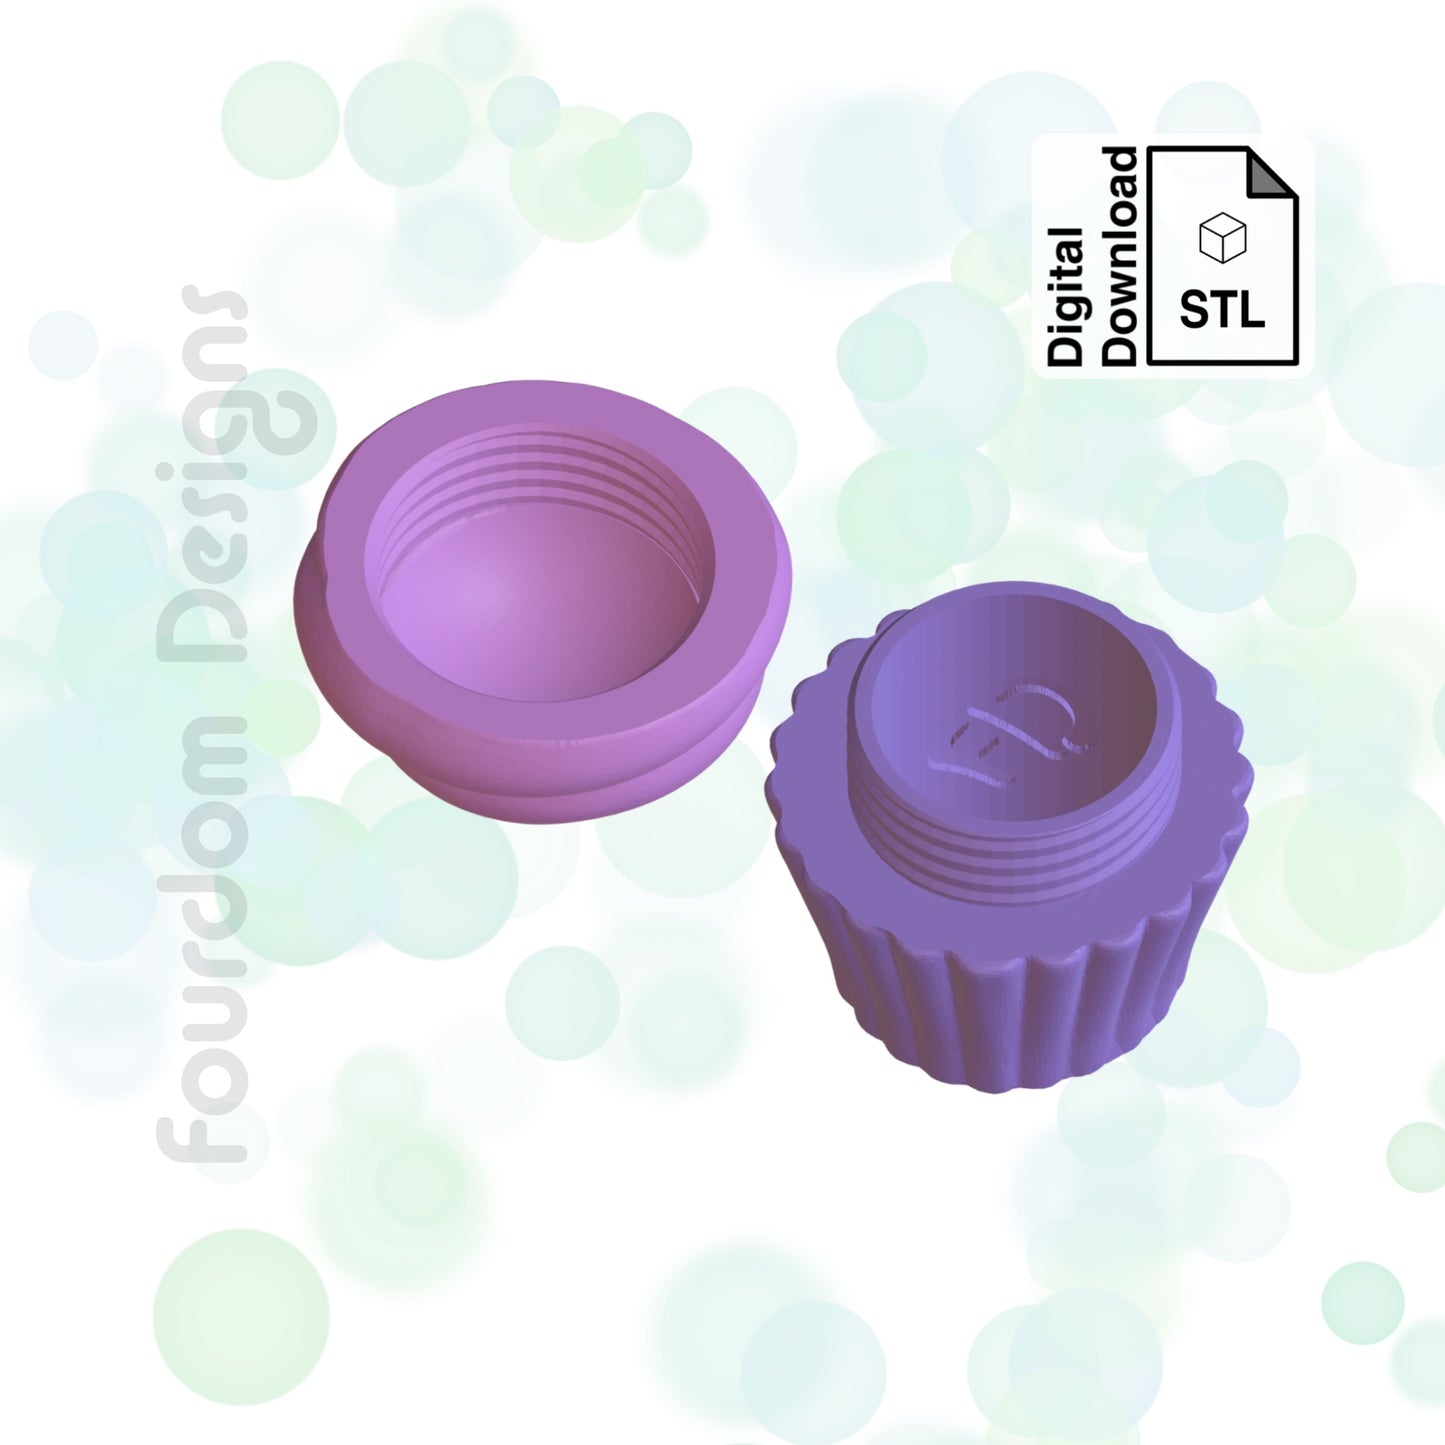 Cupcake Keychain with Removable Screw Top Pill Box Hex STL File for 3D Printing - Digital Download